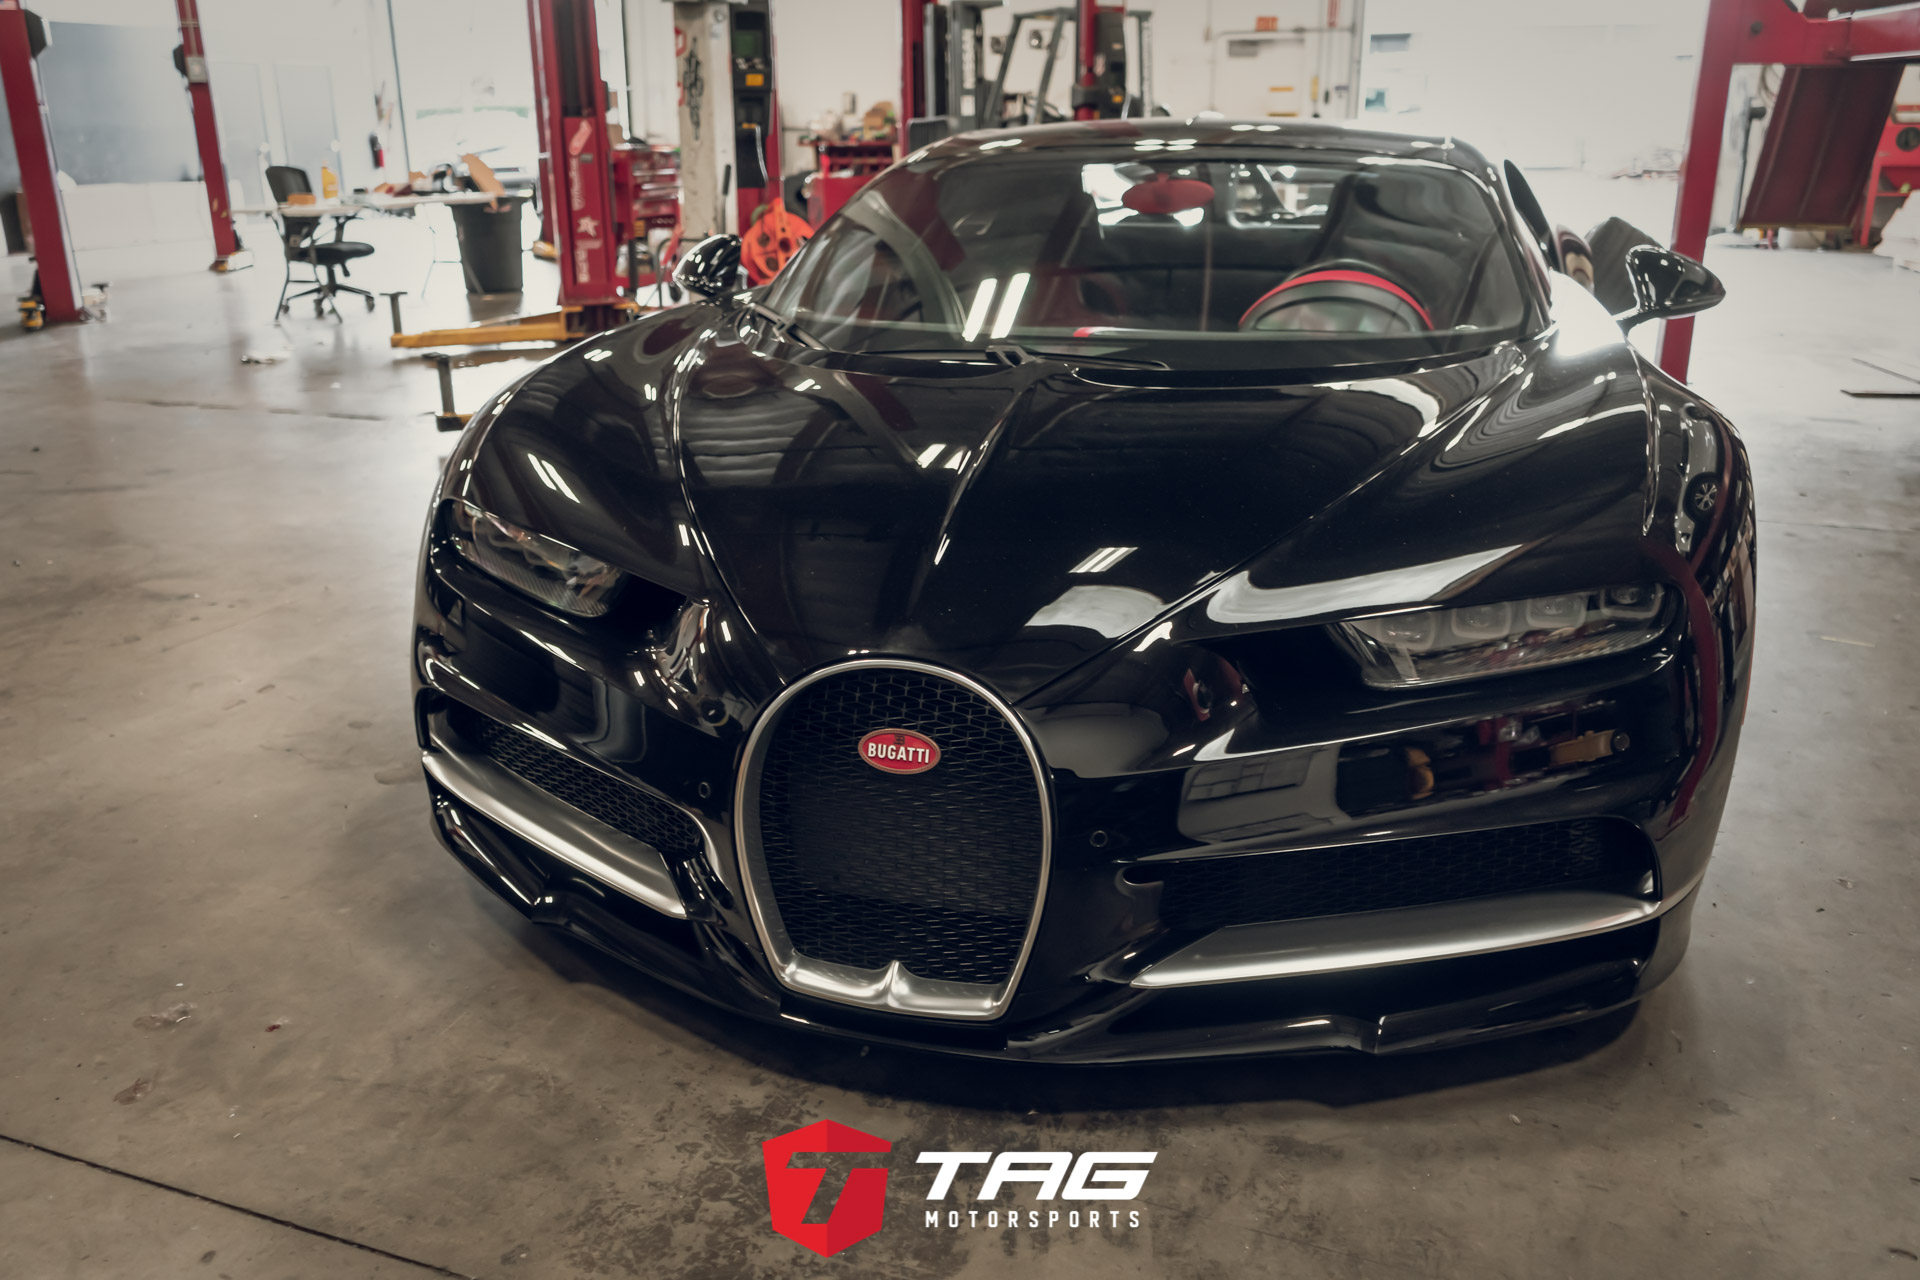 Waking up in Bugatti's at TAG. The Bugatti Chiron Project has started!